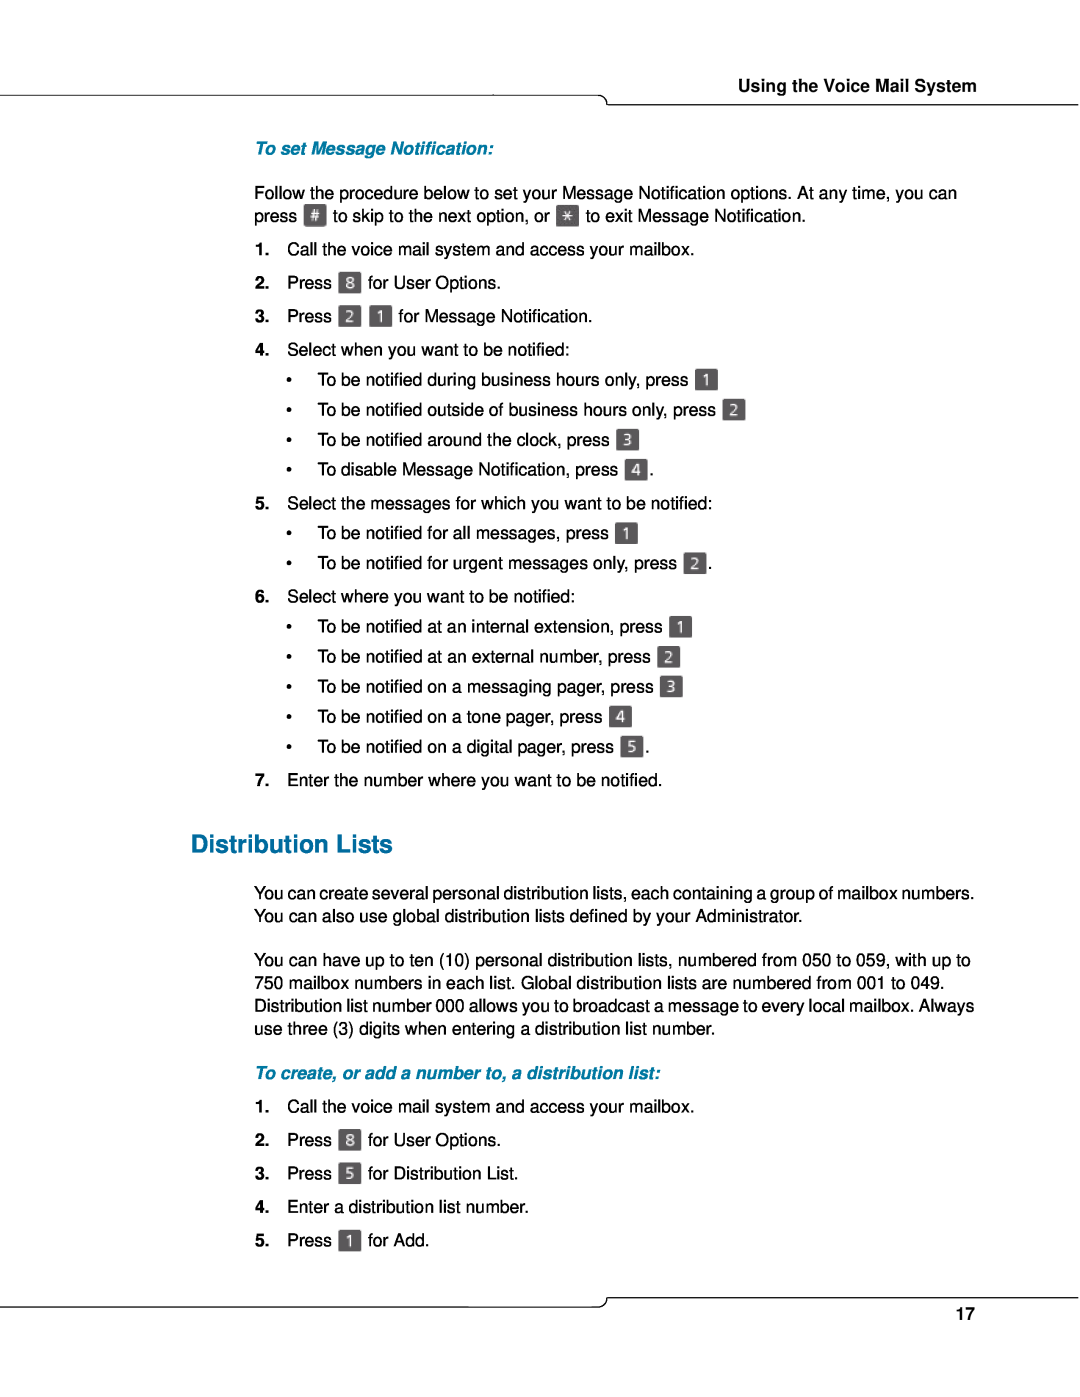 Mitel 3300 manual Distribution Lists, Using the Voice Mail System 